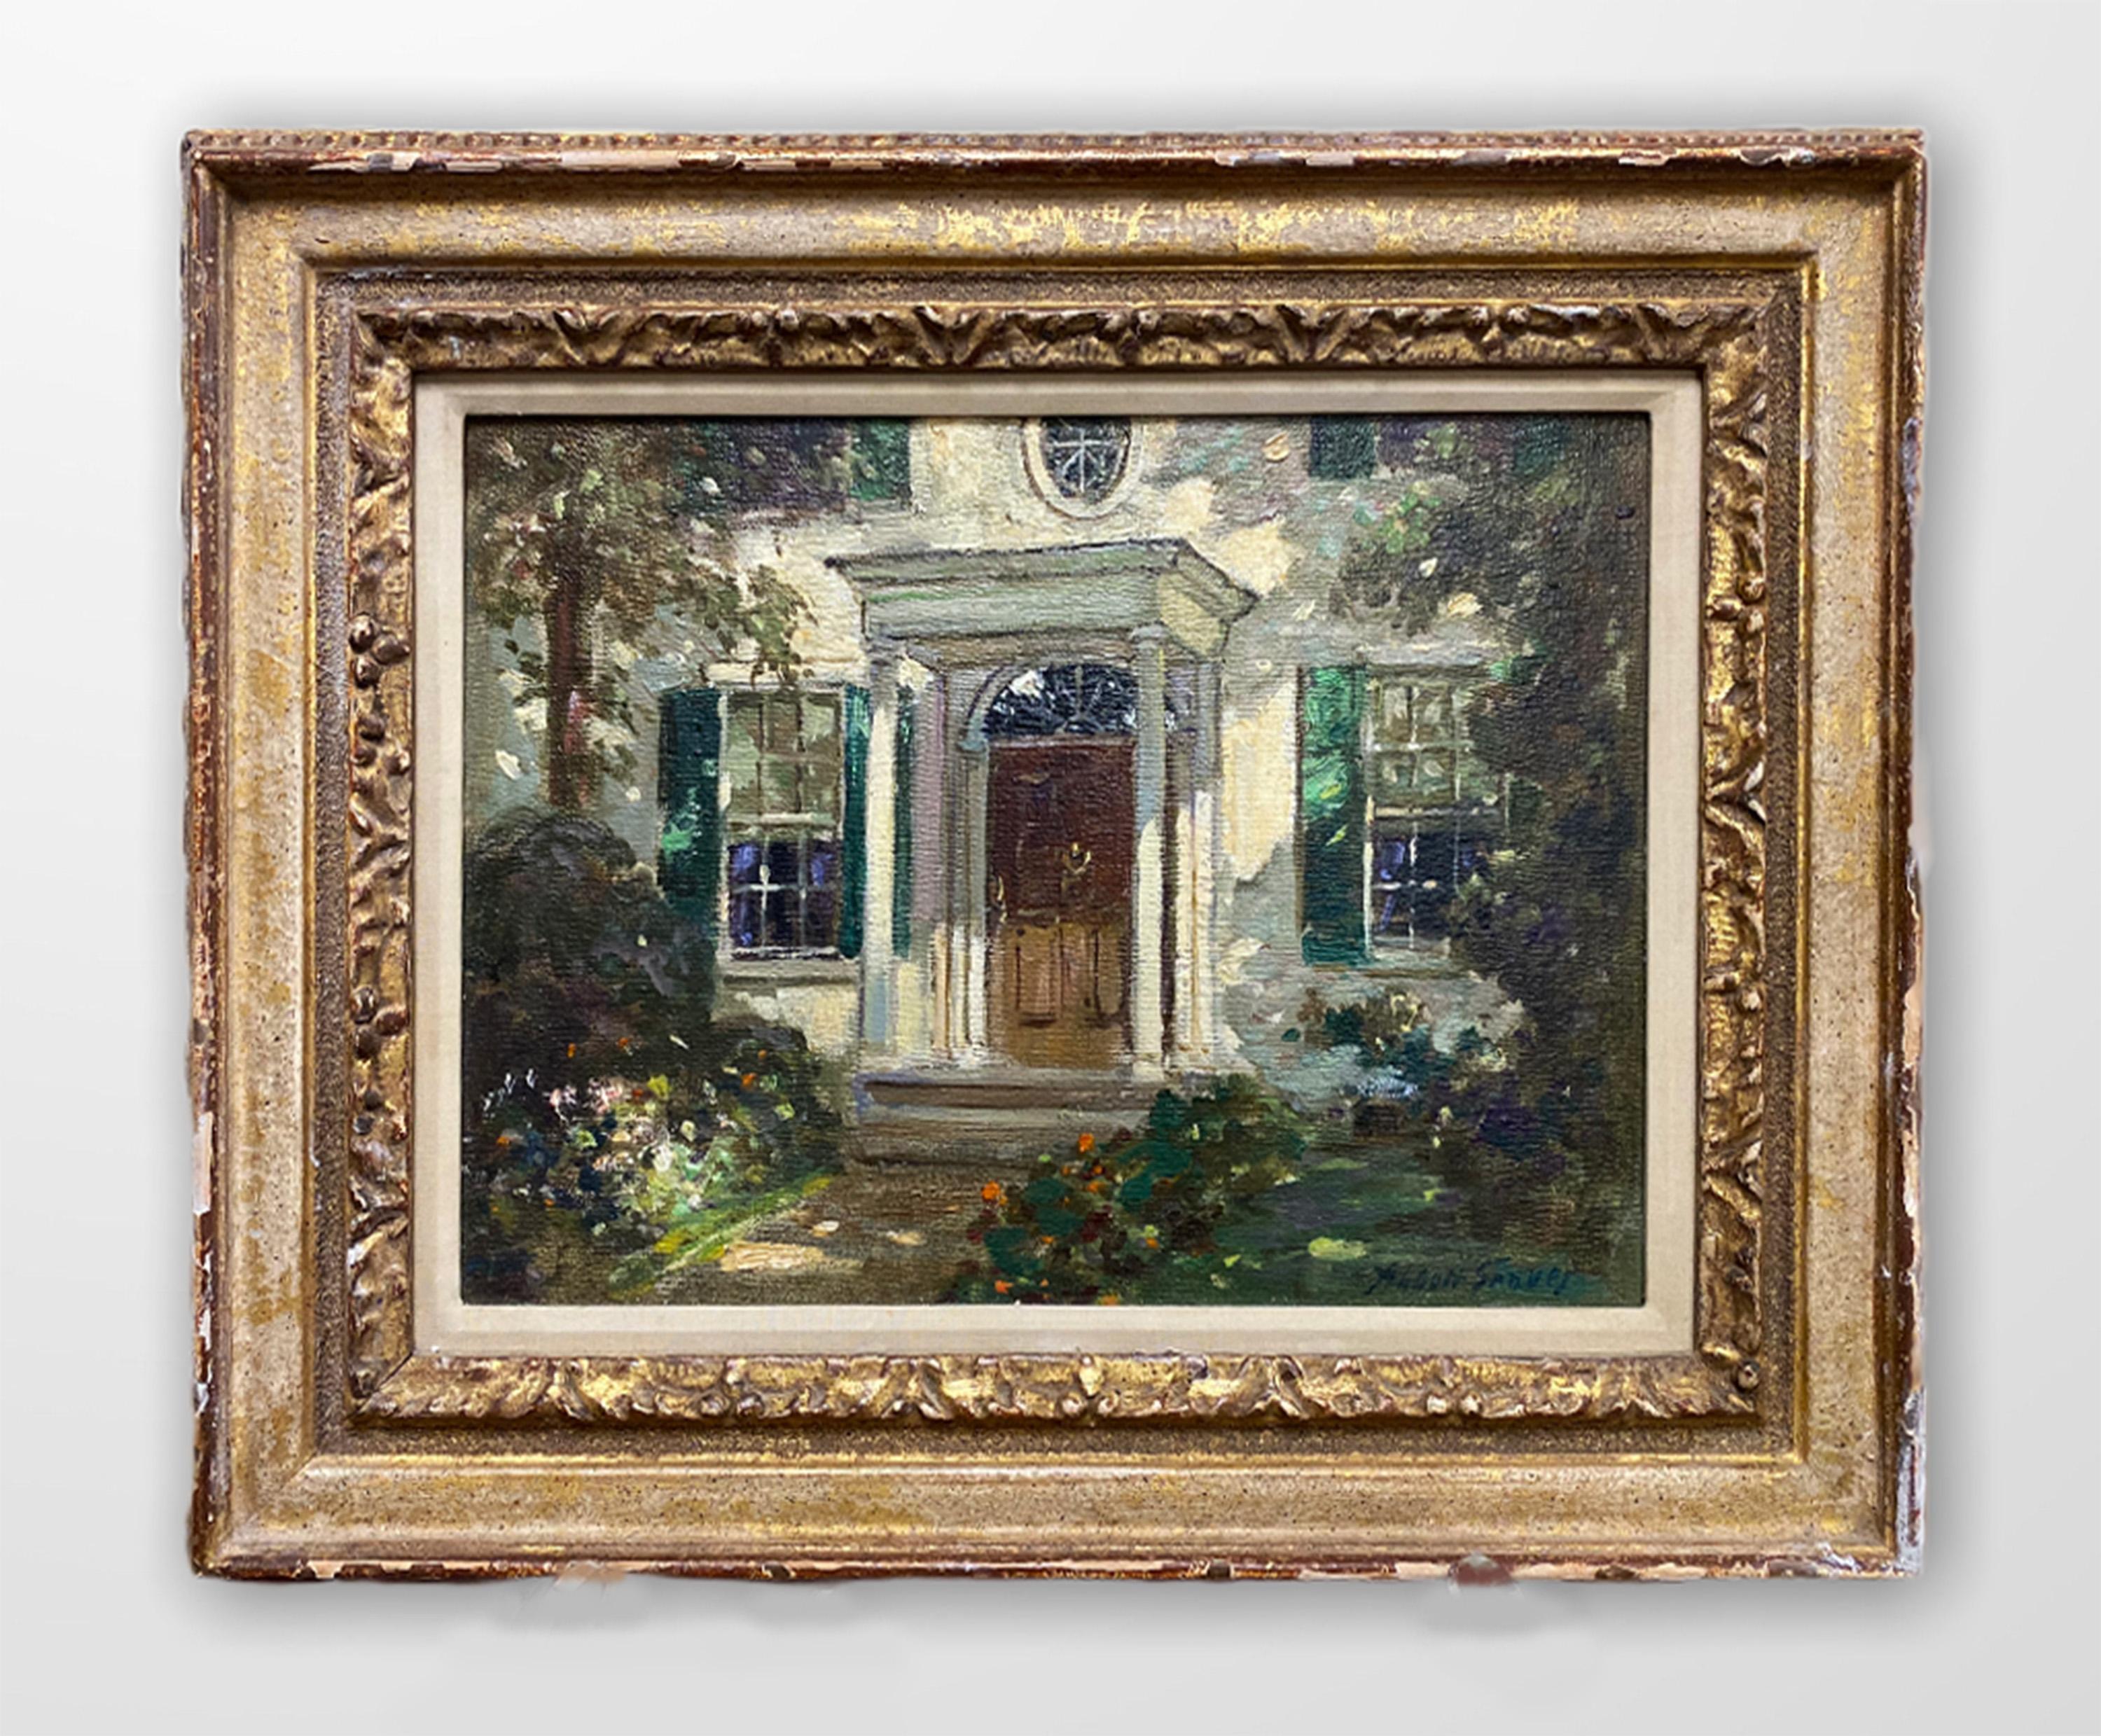 House of 1812 (the Nathaniel Lord mansion in Kennebunkport, Maine) - Painting by Abbott Fuller Graves